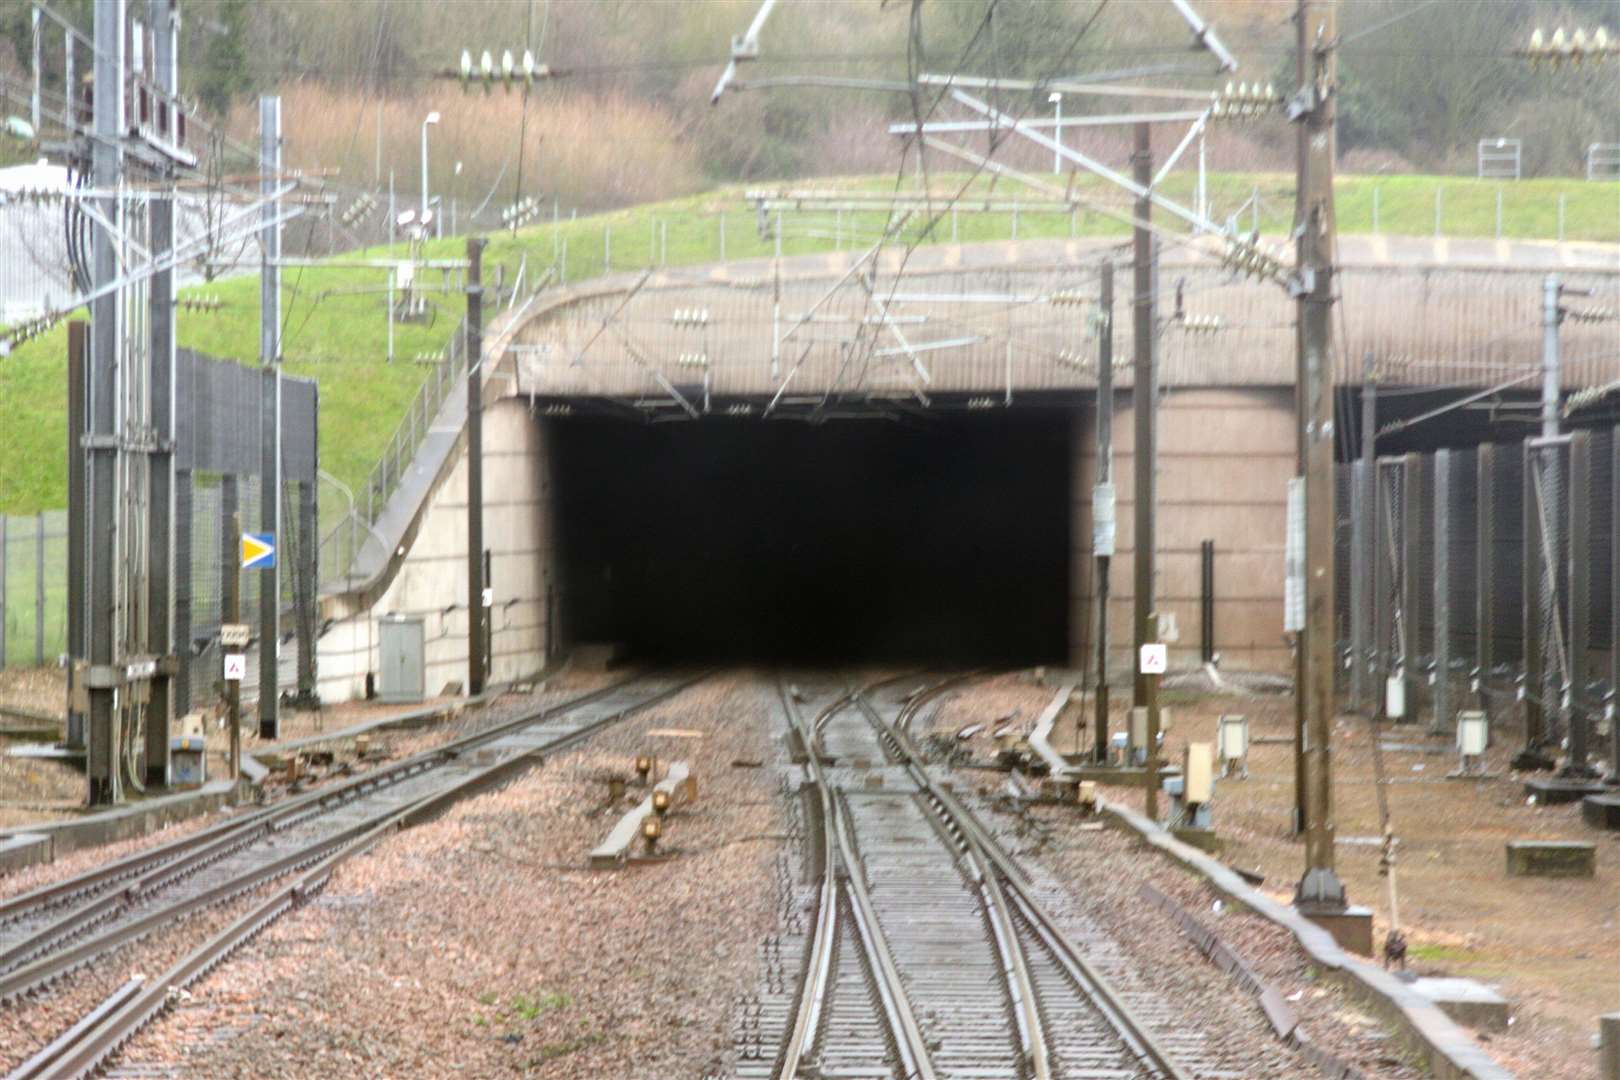 A spokesman from Eurotunel confirmed a person had been detected in the tunnel